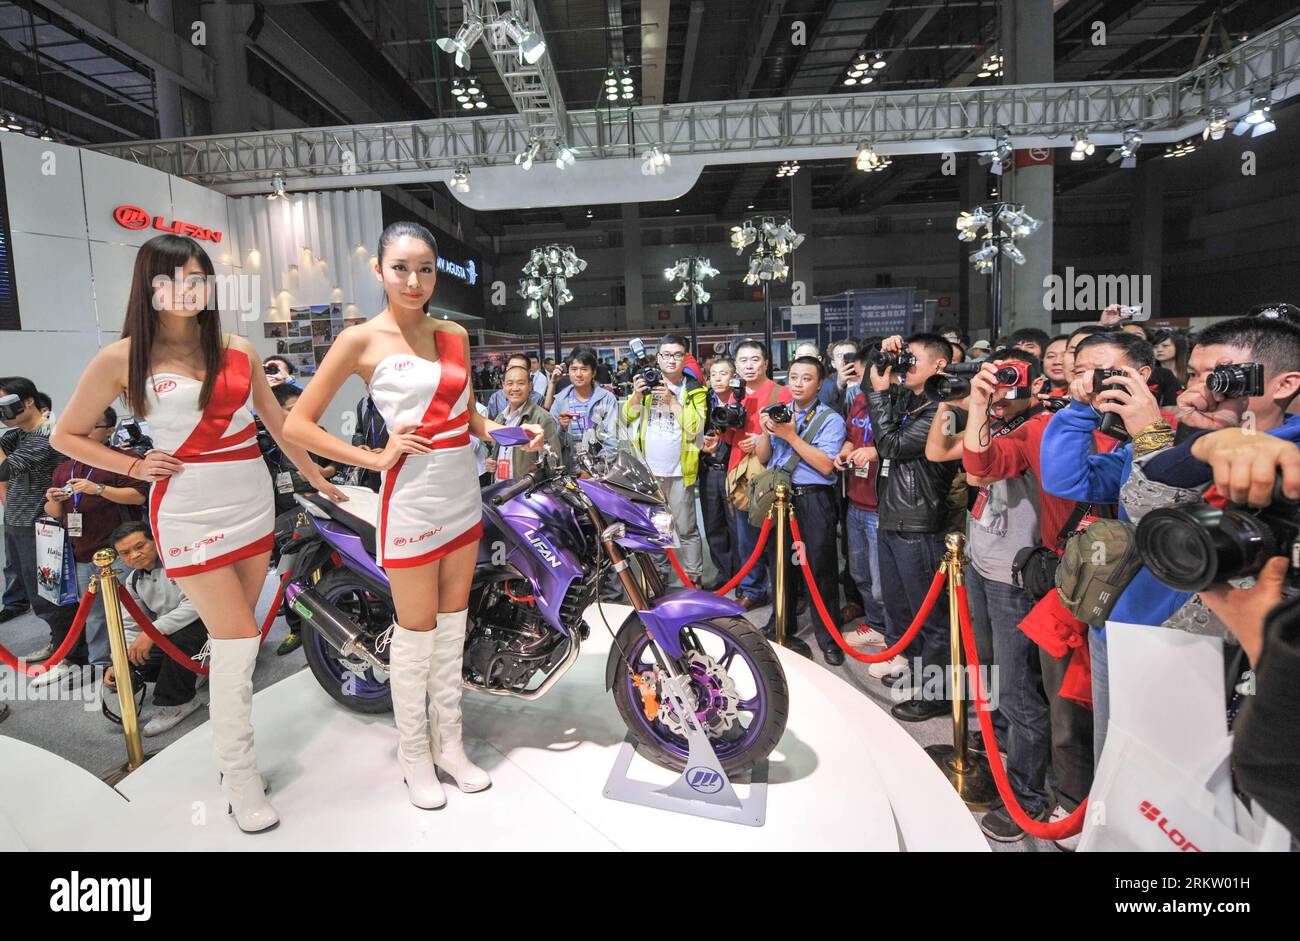 Bildnummer: 58577707  Datum: 11.10.2012  Copyright: imago/Xinhua (121011) -- CHONGQING, Oct. 11, 2012 (Xinhua) -- Visitors take photos of the motocycles exhibited in the 11th China International Motorcycle Trade Exhibition in southwest China s Chongqing Municipality, Oct. 11, 2012. More than 400 motorcycle companies from 10 countries and regions attended the four-day expo kicked off on Thursday. About 100 international traders also participated in the fair, and the purchase sum is expected to exceed 100 million U.S. dollars. (Xinhua/Liu Chan) (hy) CHINA-CHONGQING-MOTOR CYCLE EXPO-OPENING (CN) Stock Photo